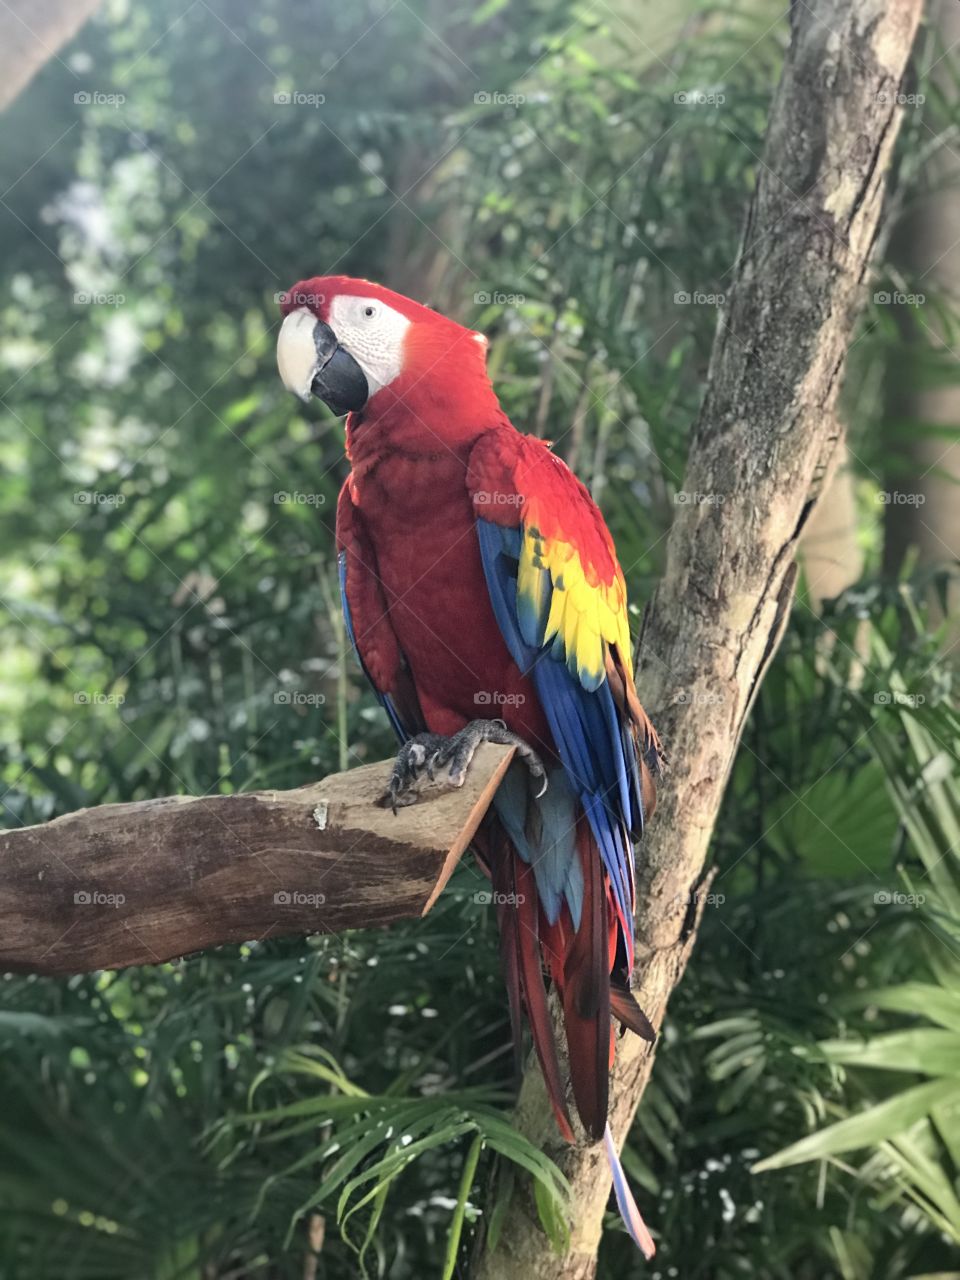 Red Macaw also known as a scarlet macaw is a large red, yellow, and blue South American parrot. They are a member of a large group of Neotropical parrots called macaws. It is native to humid evergreen forests of tropical South America